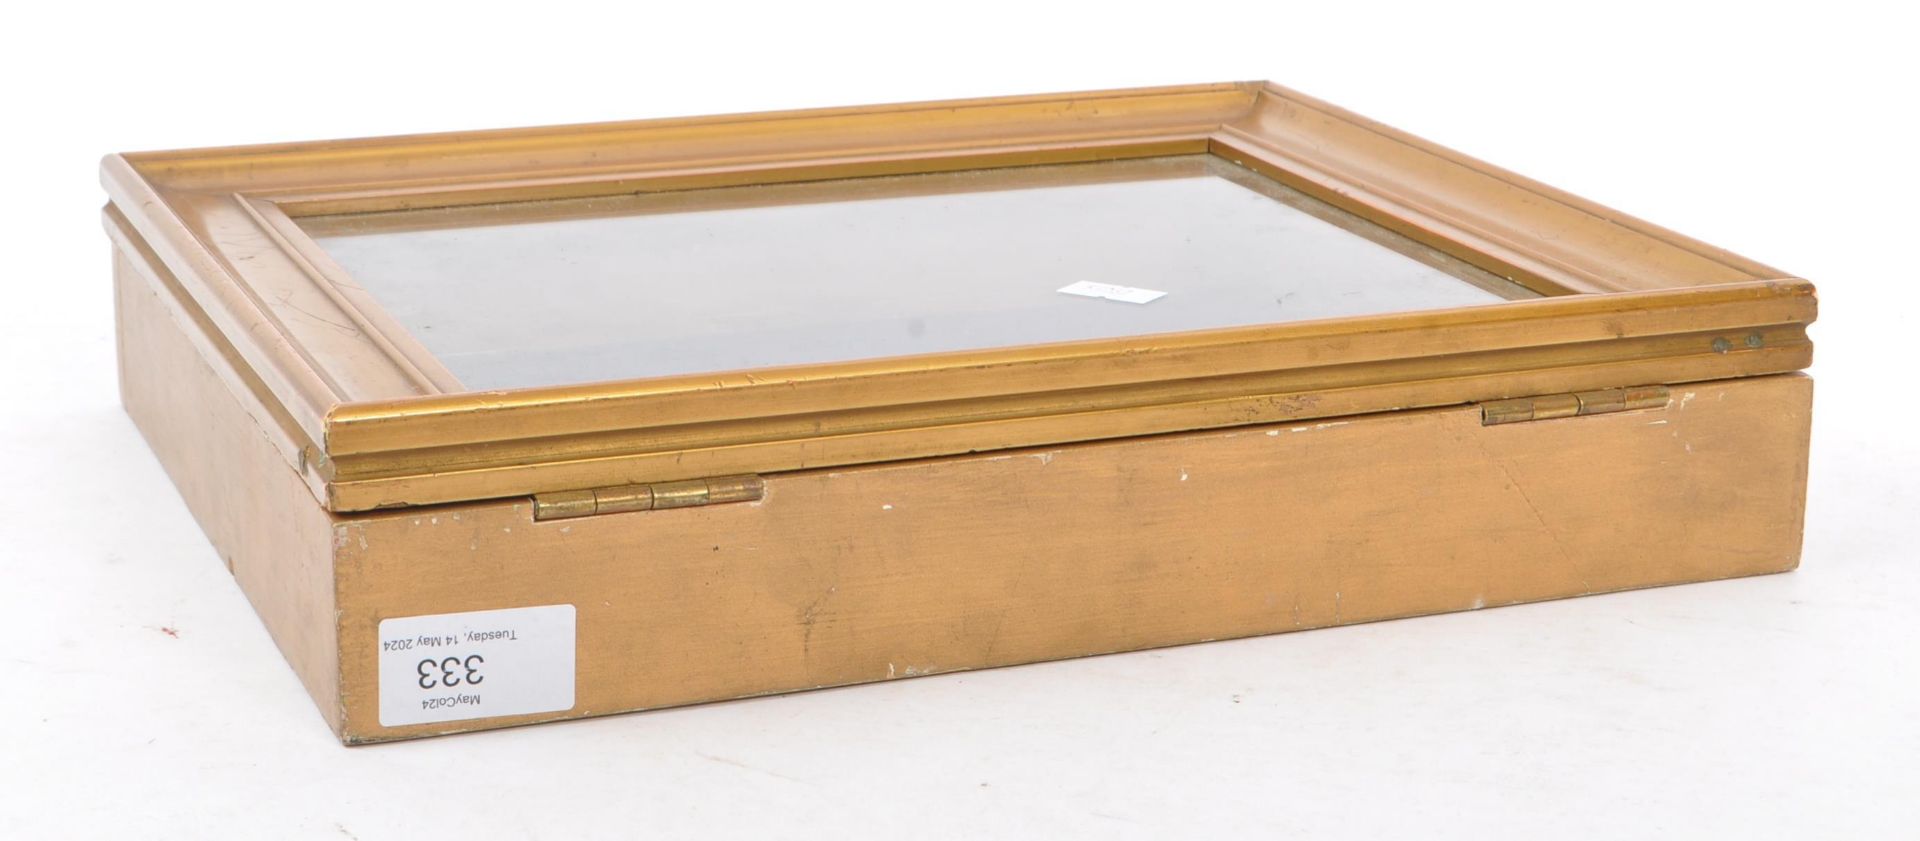 EARLY 20TH CENTURY TABLE TOP GILT DISPLAY CASE - Image 6 of 6